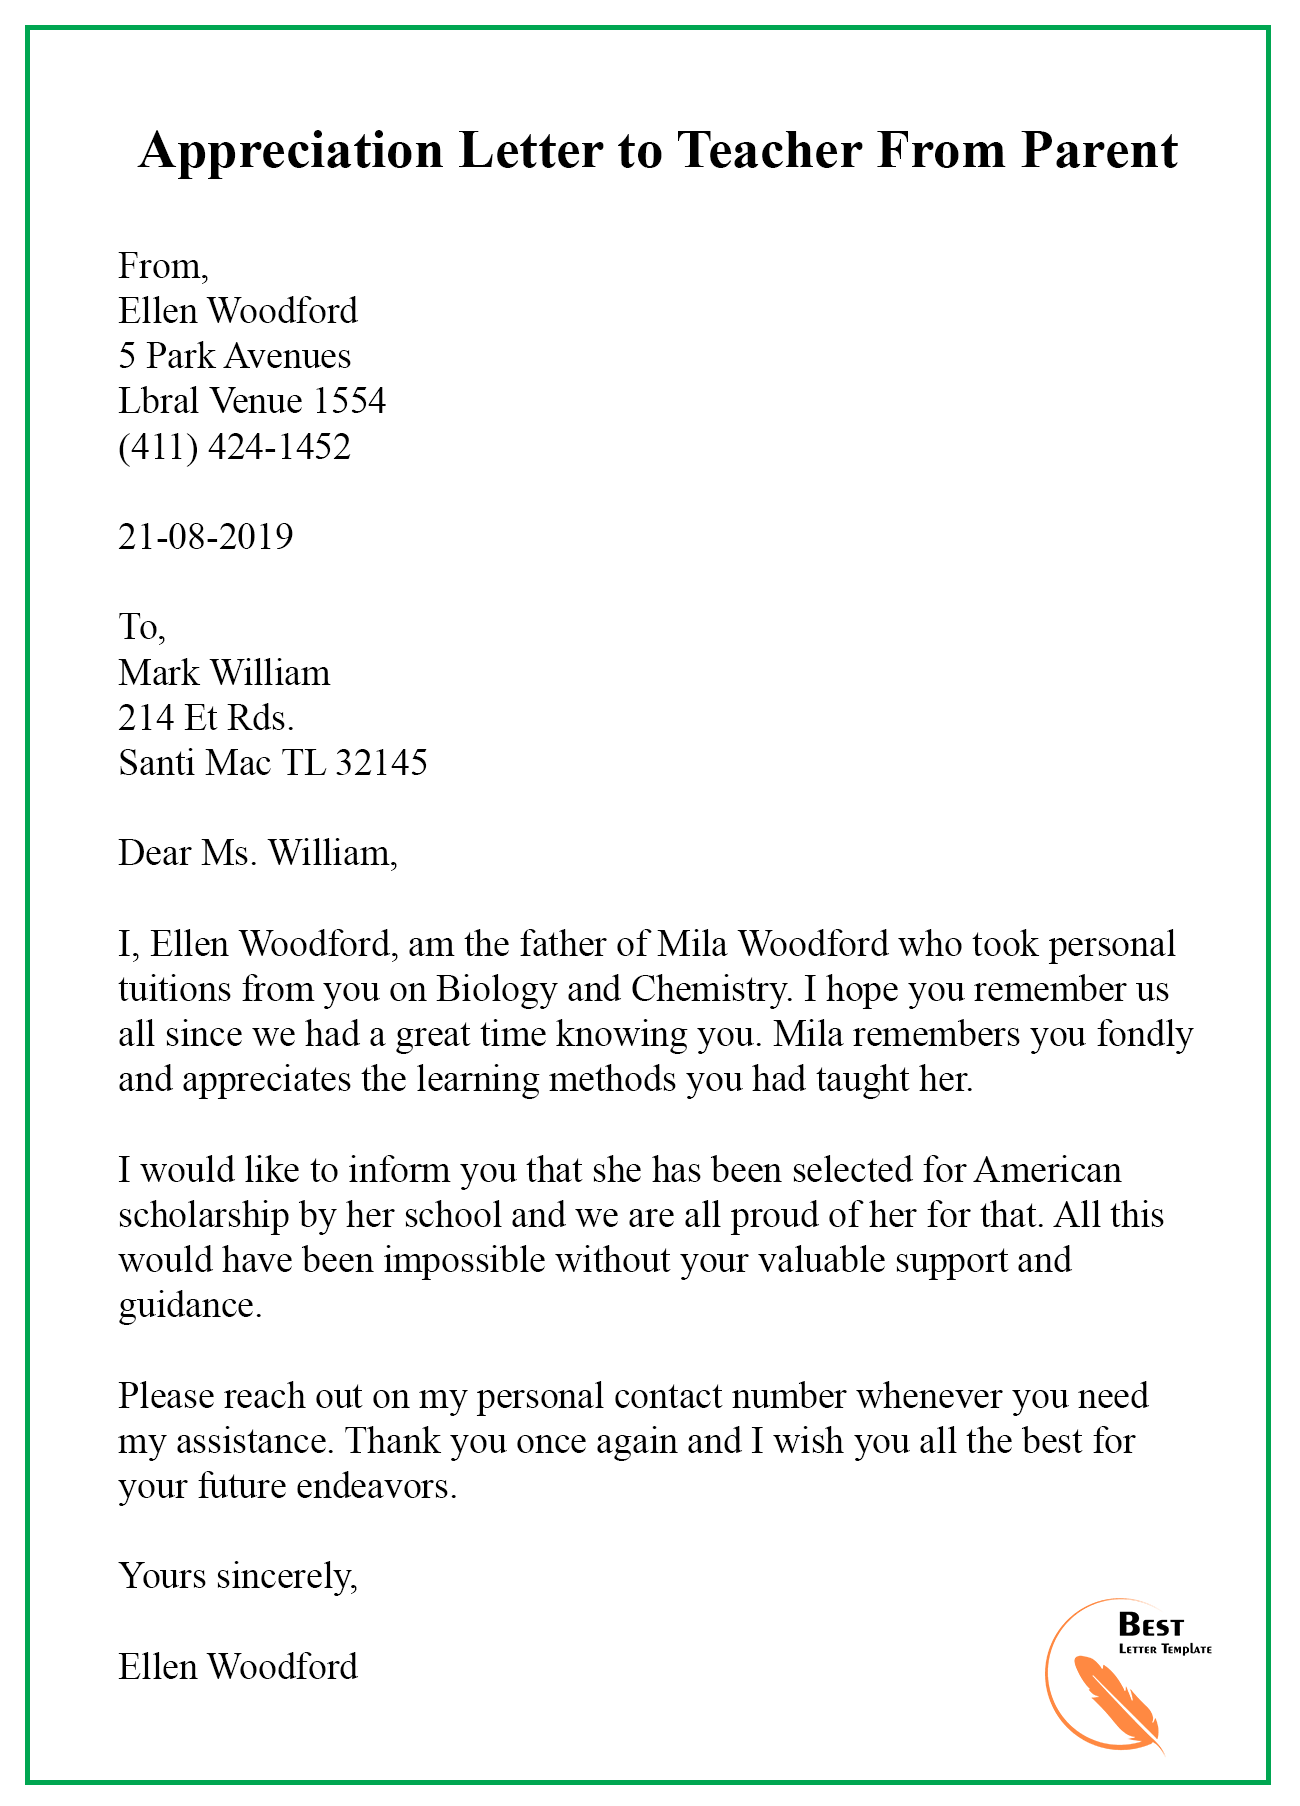 Appreciation Letter to the Teacher - Format, Sample & Example